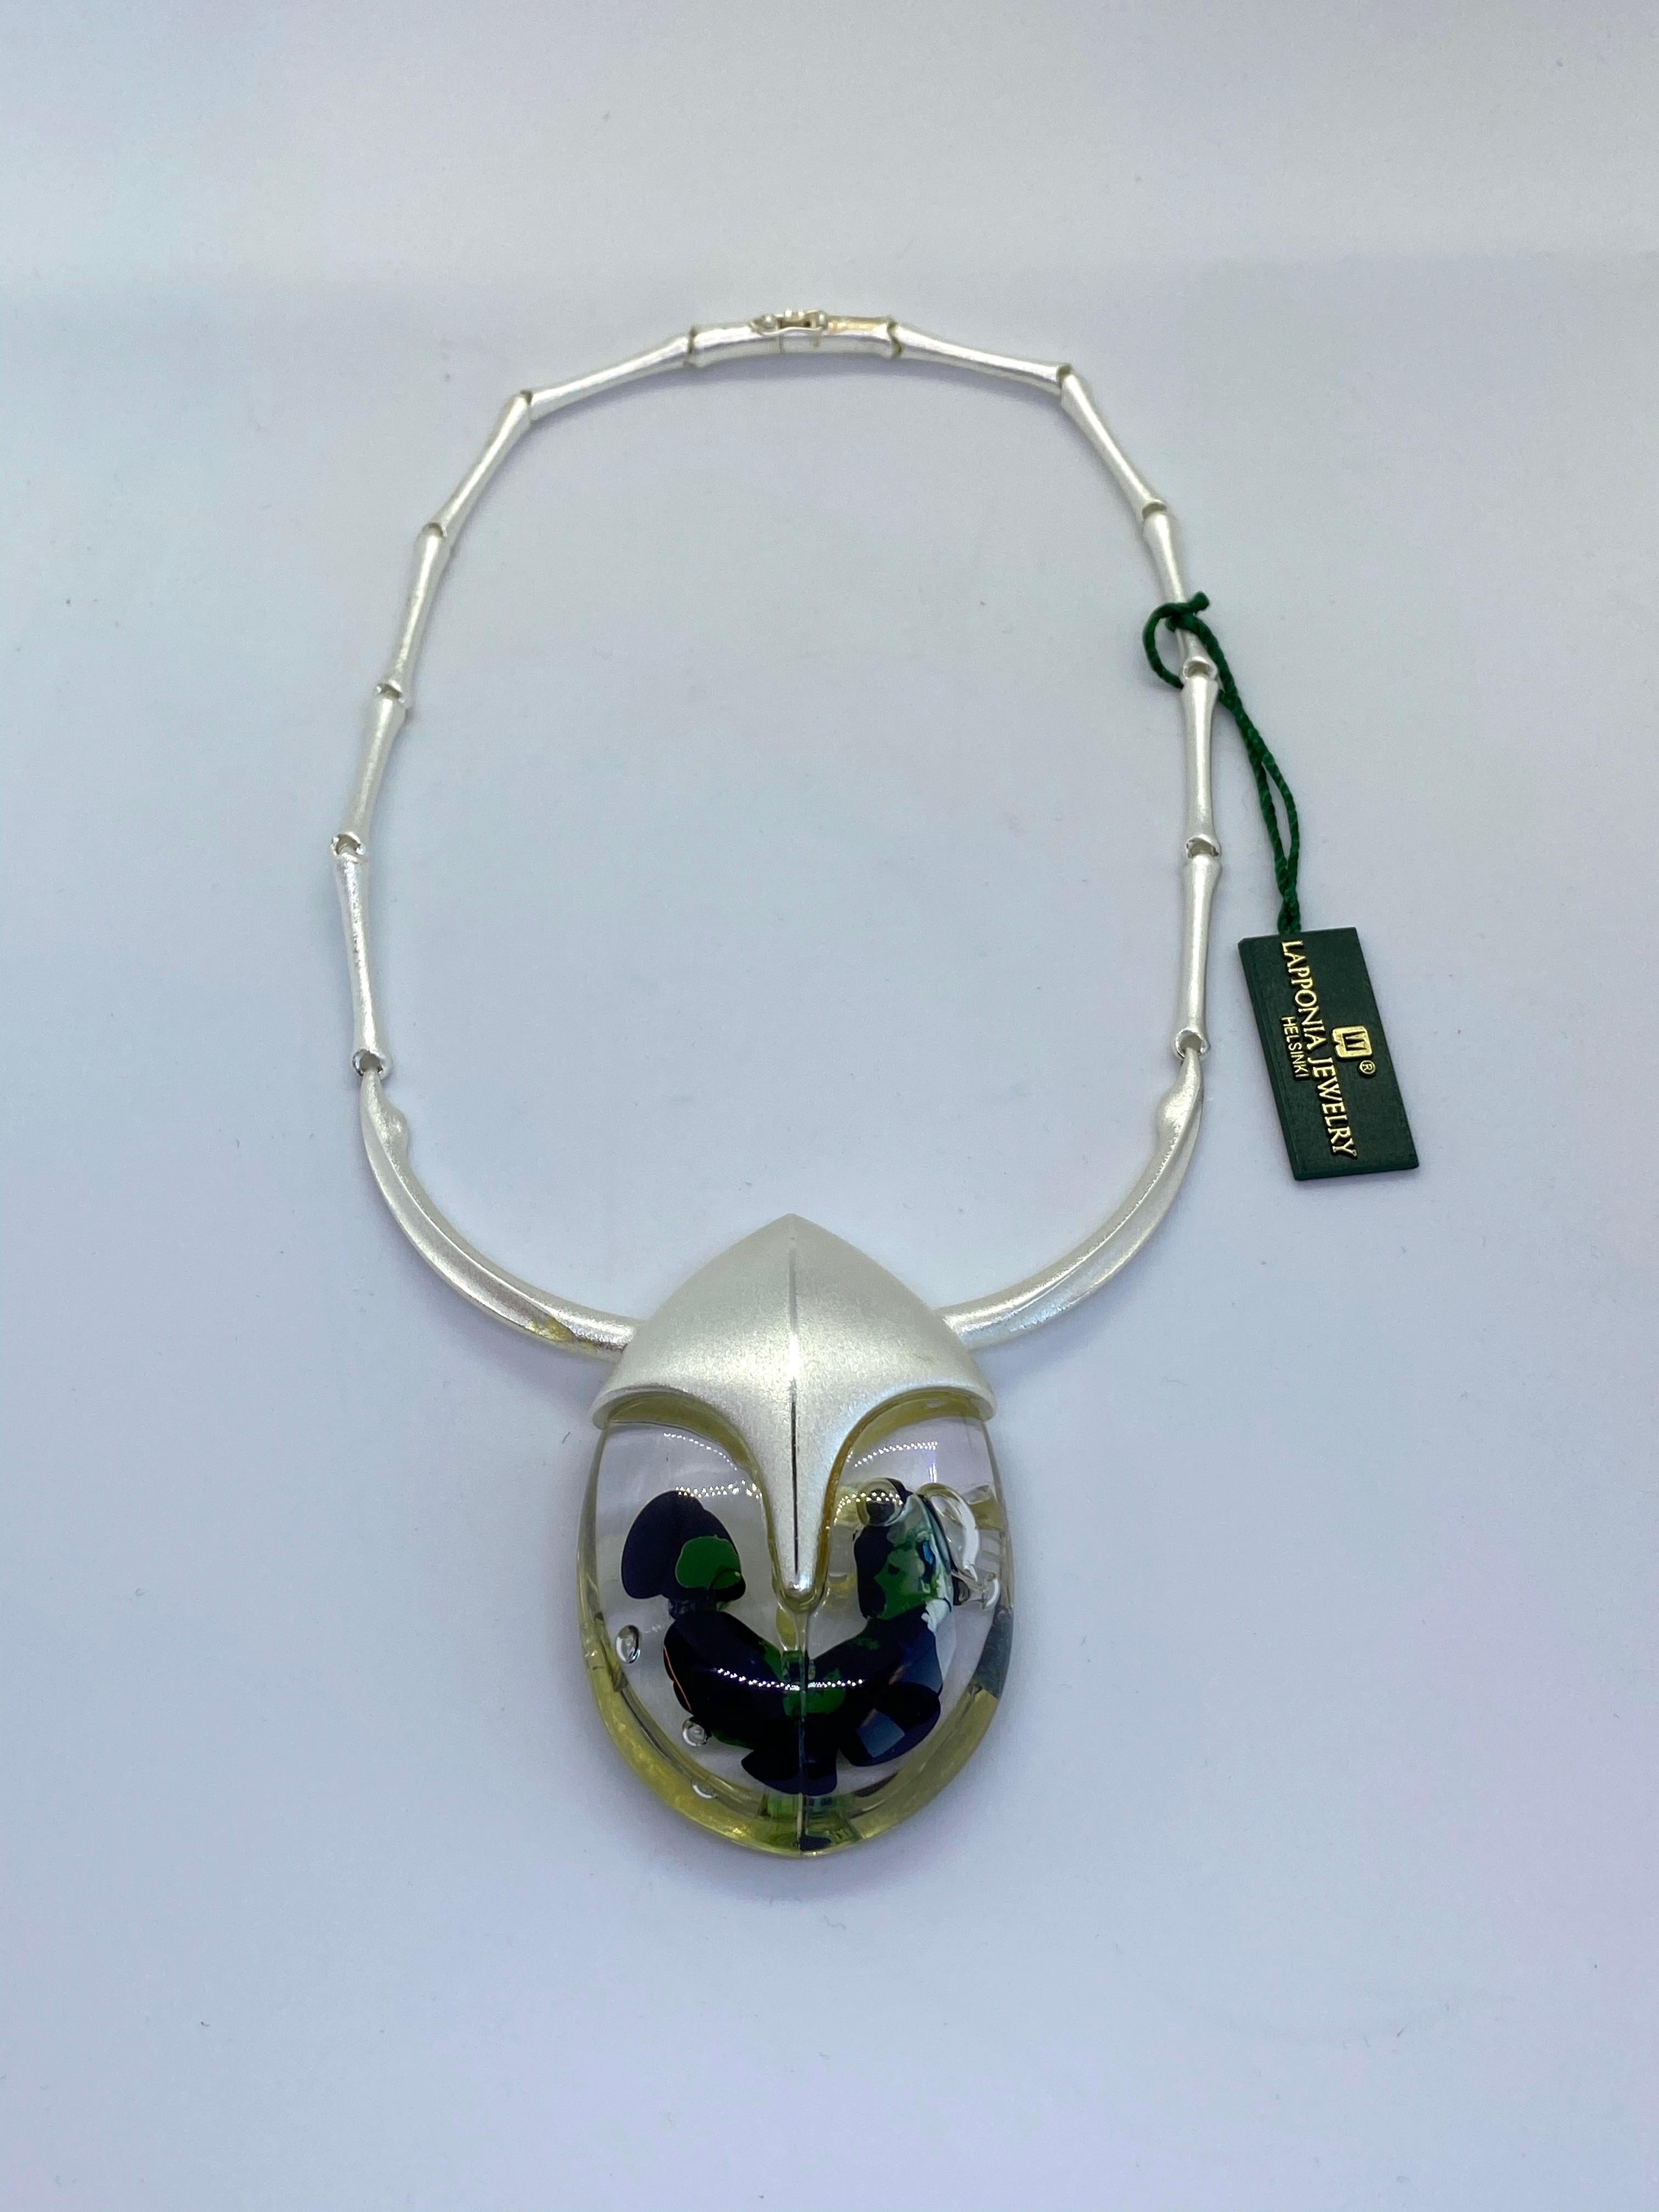 Silver Finland Björn Weckström Lapponia Scarabeo Necklace
Helsinki Finland 2001
Unused, old stock
In original bag

The most distinct period of material bound design in Bjorn Weckstrom's production,are the series of 25 sculptures in acrylic resin,